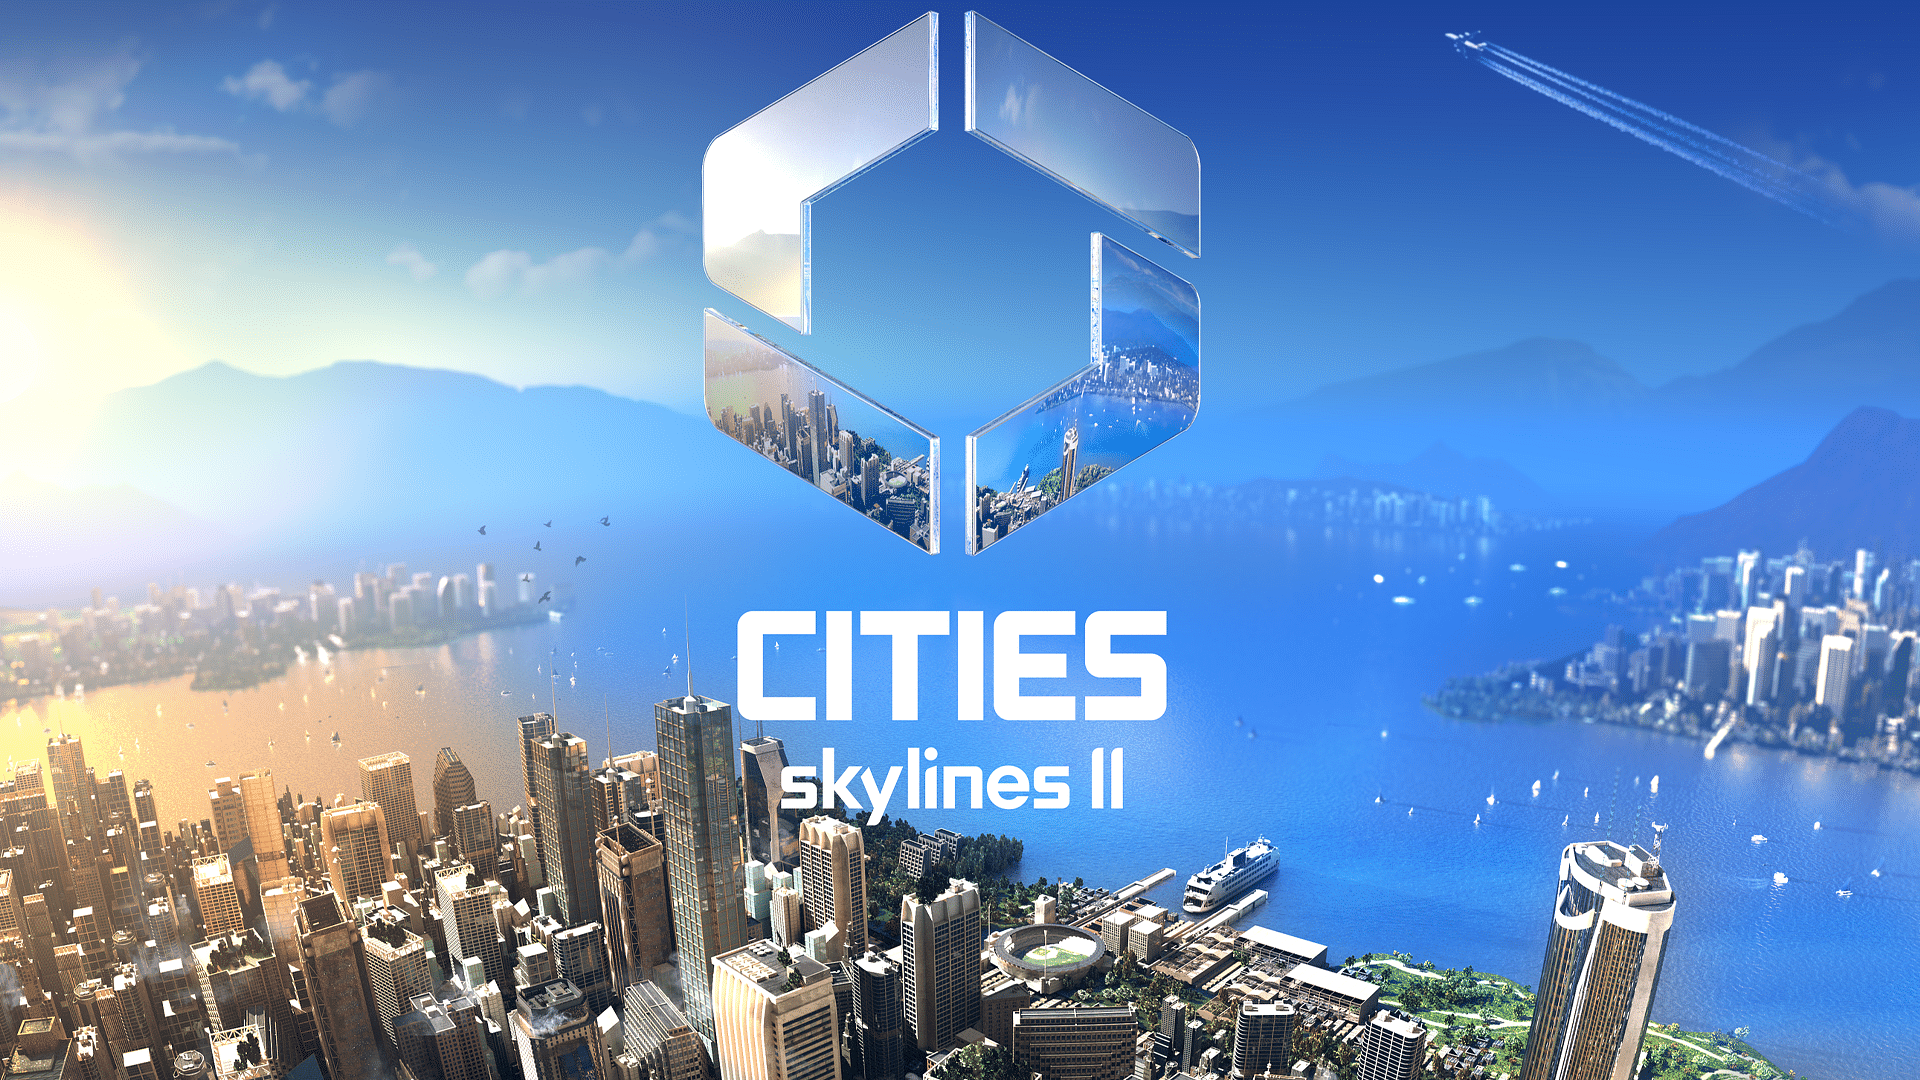 An image displaying the main cover of Cities: Skylines 2 with sea side metropolis